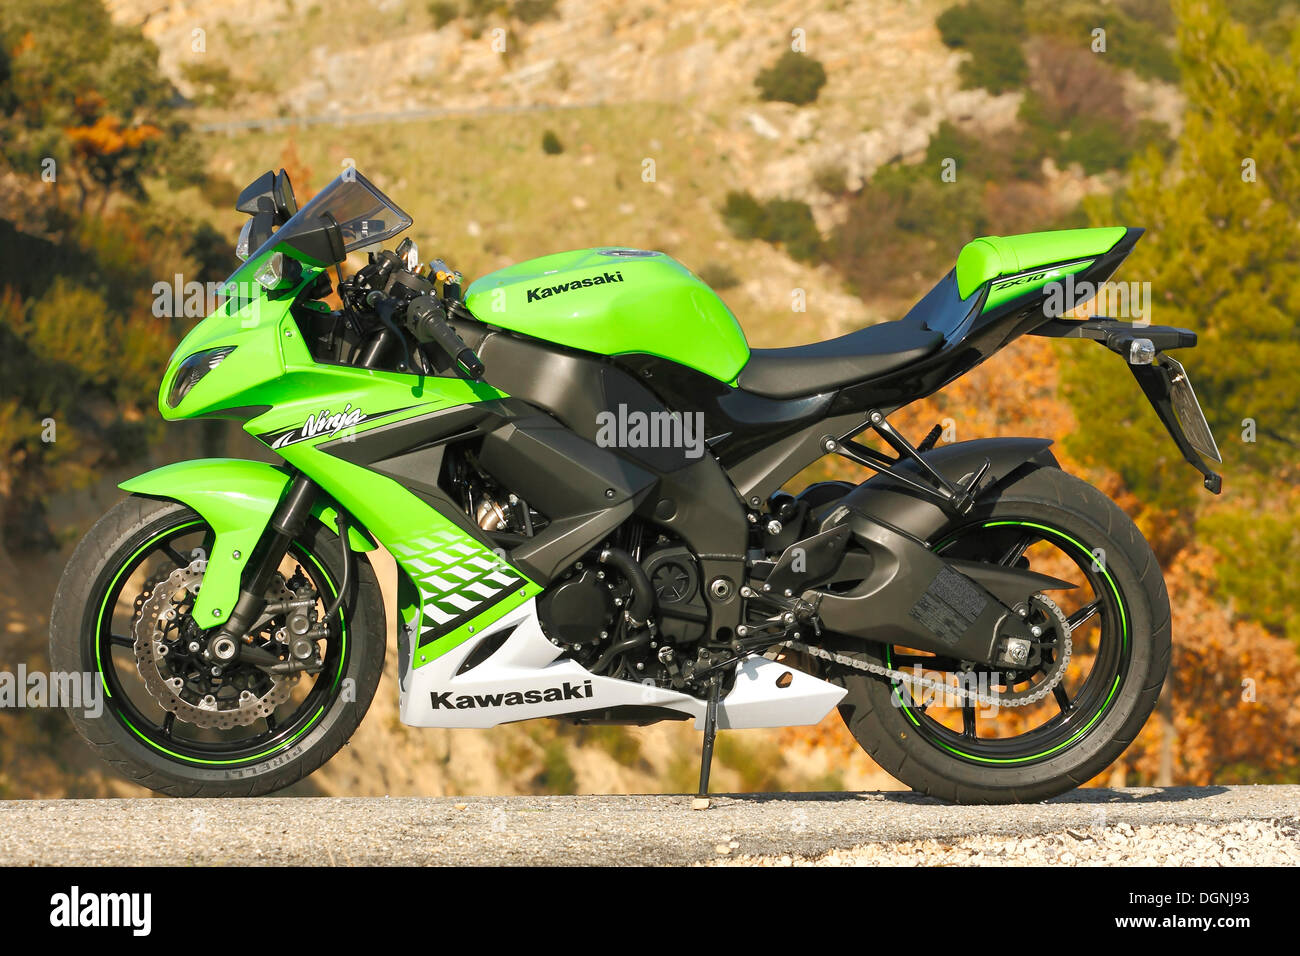 Kawasaki Zx 10r High Resolution Stock Photography and Images - Alamy